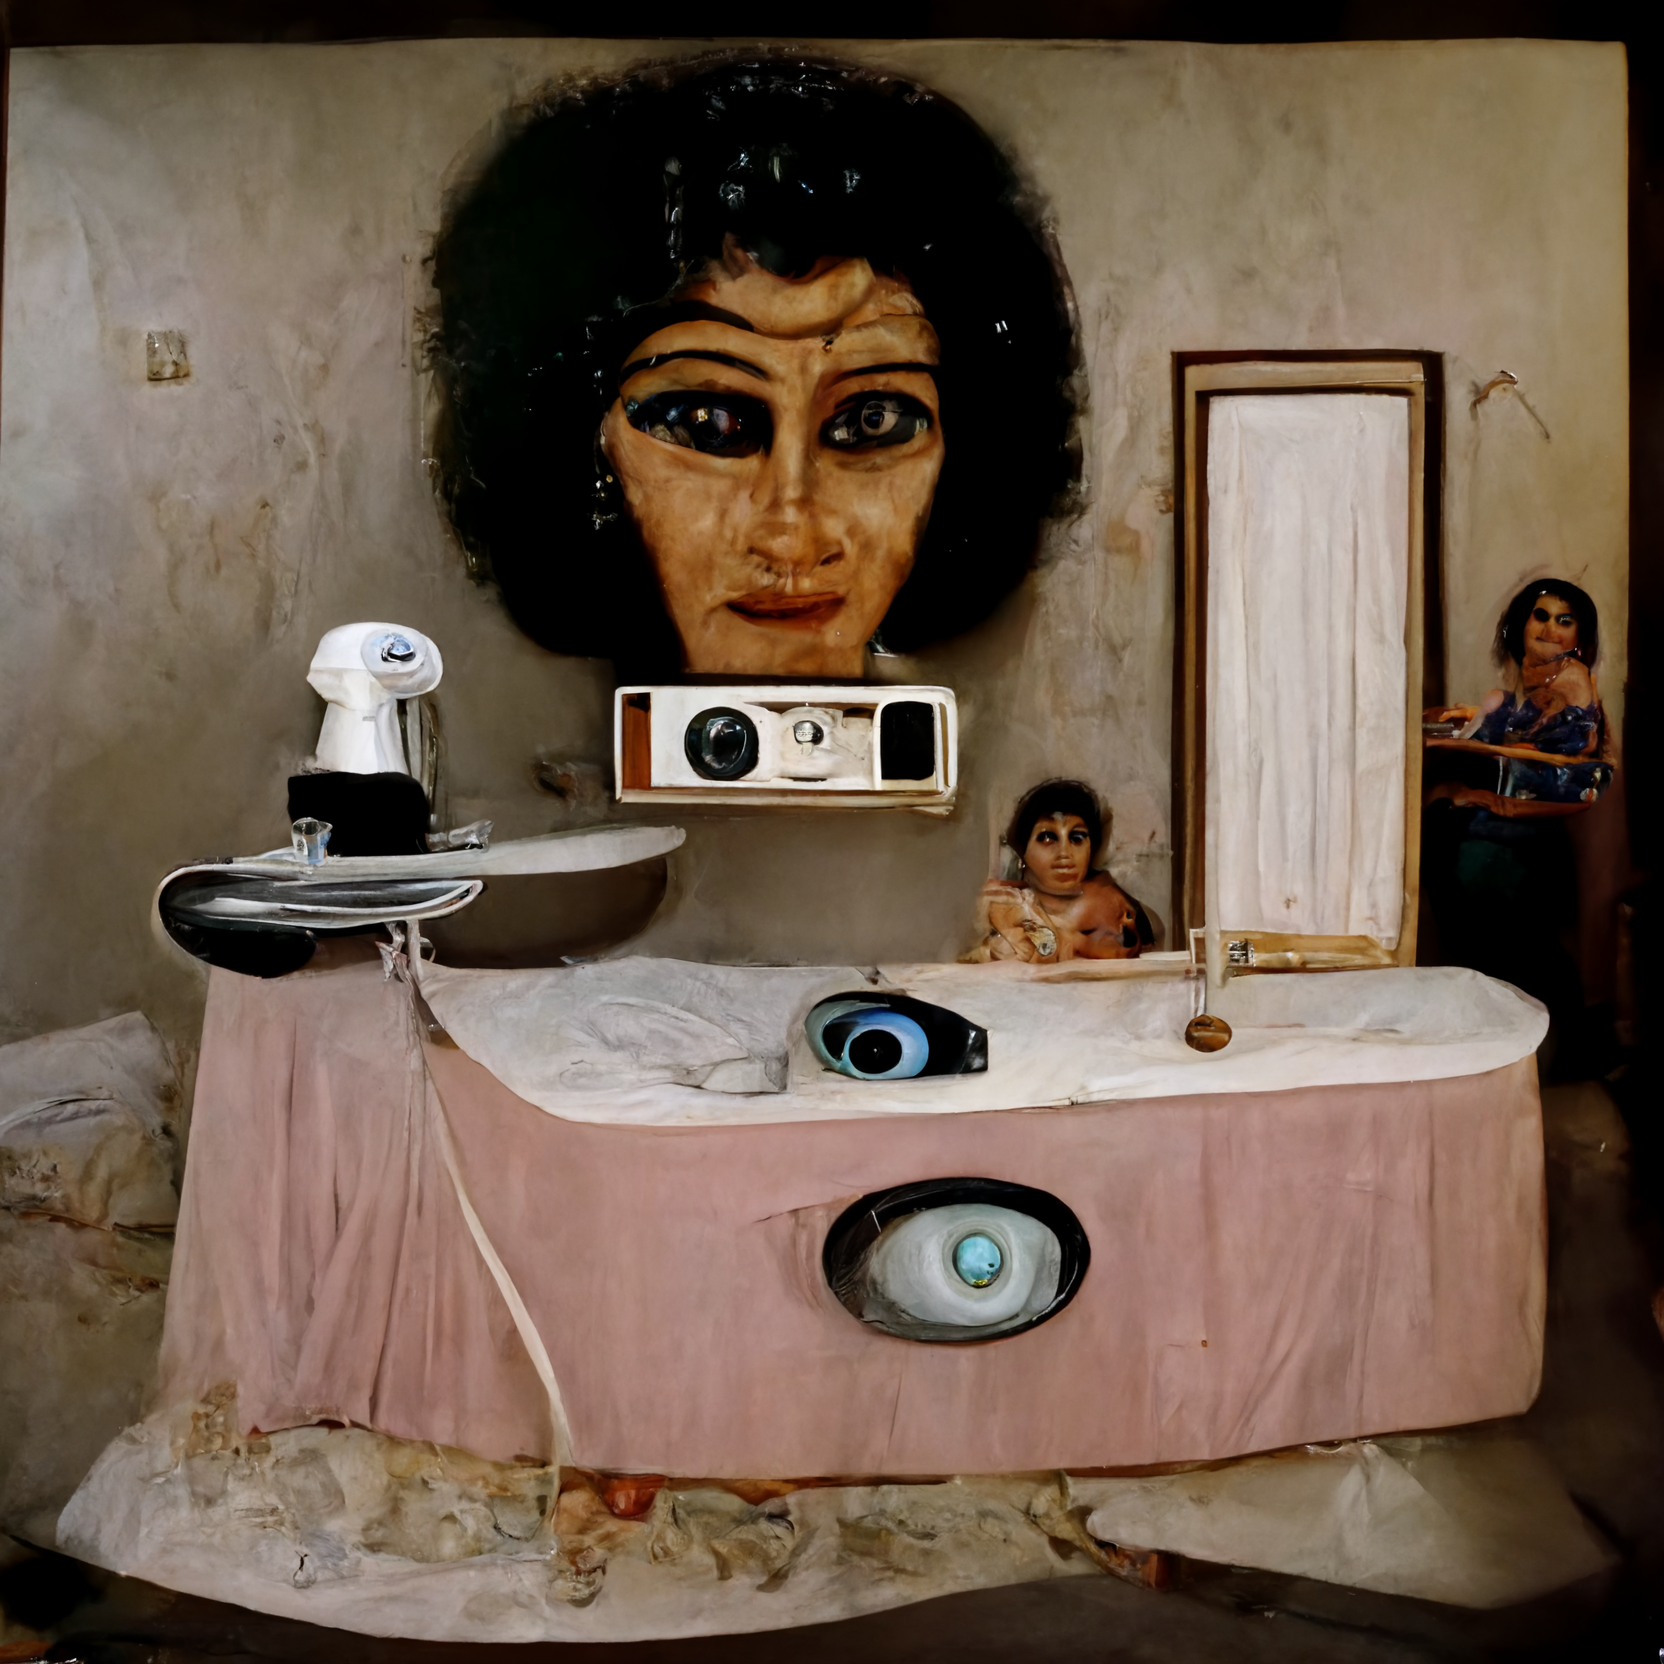 AI-generated image that resembles a bizarre home with clay walls and cameras and floating heads